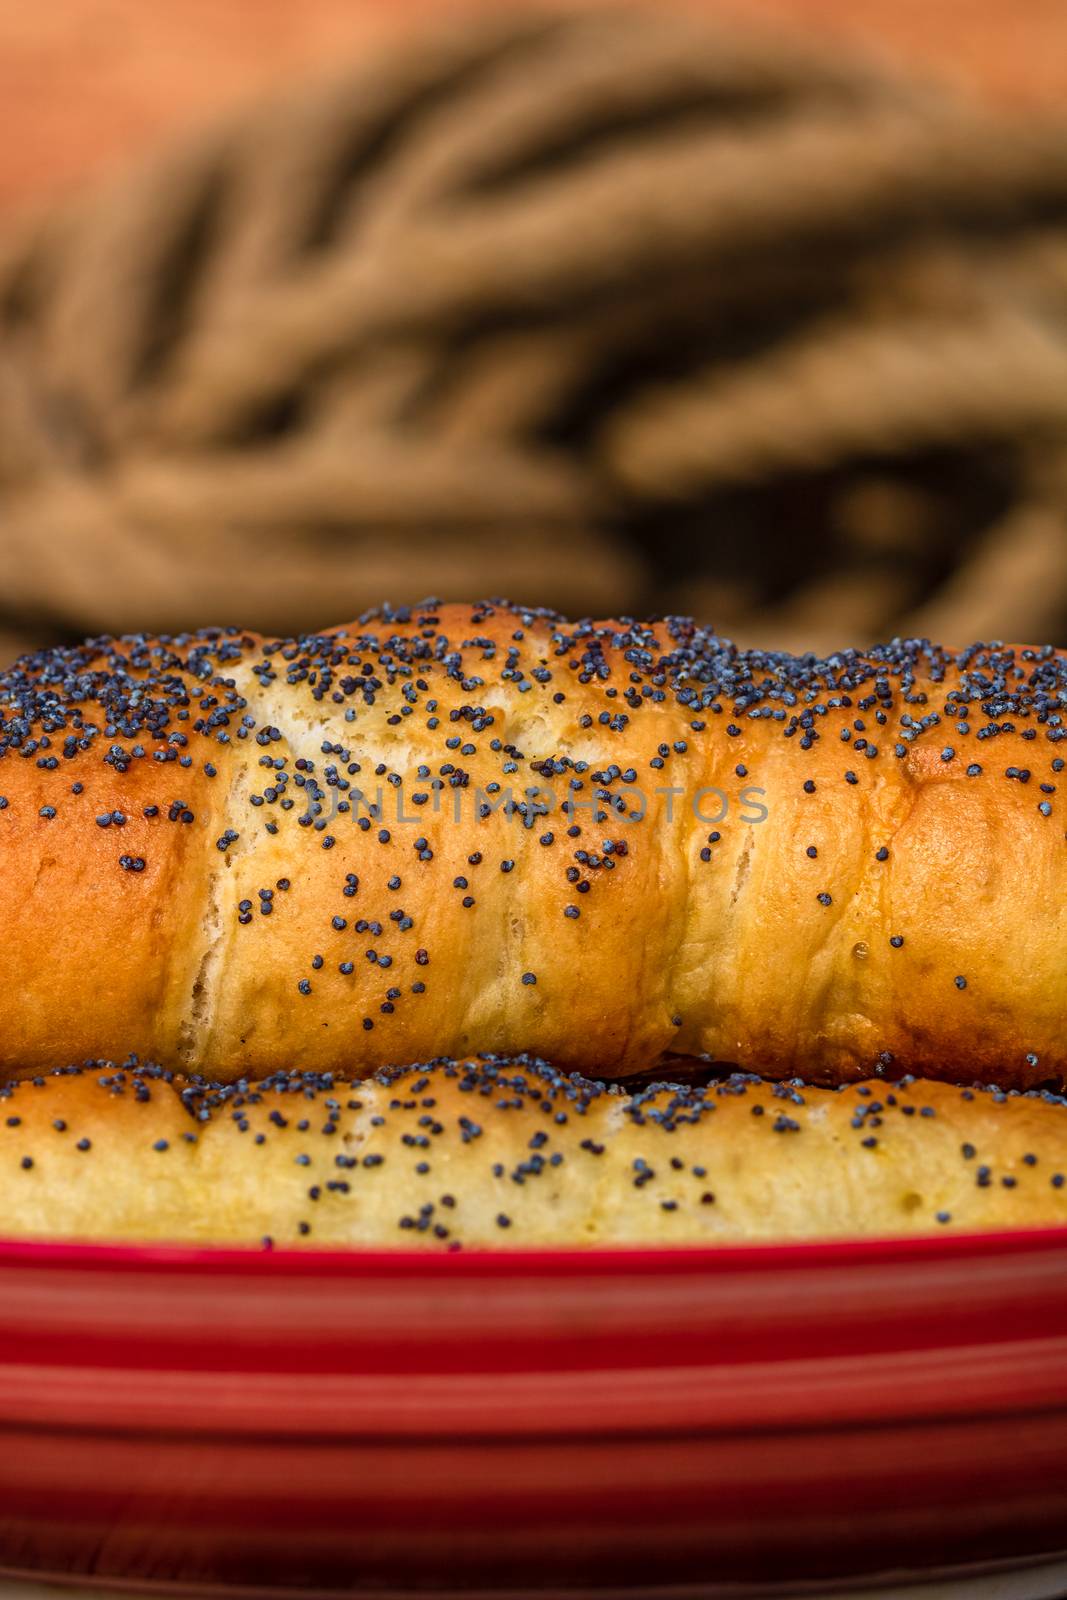 Sausages baked in dough sprinkled with salt and poppy seeds in a by vladispas